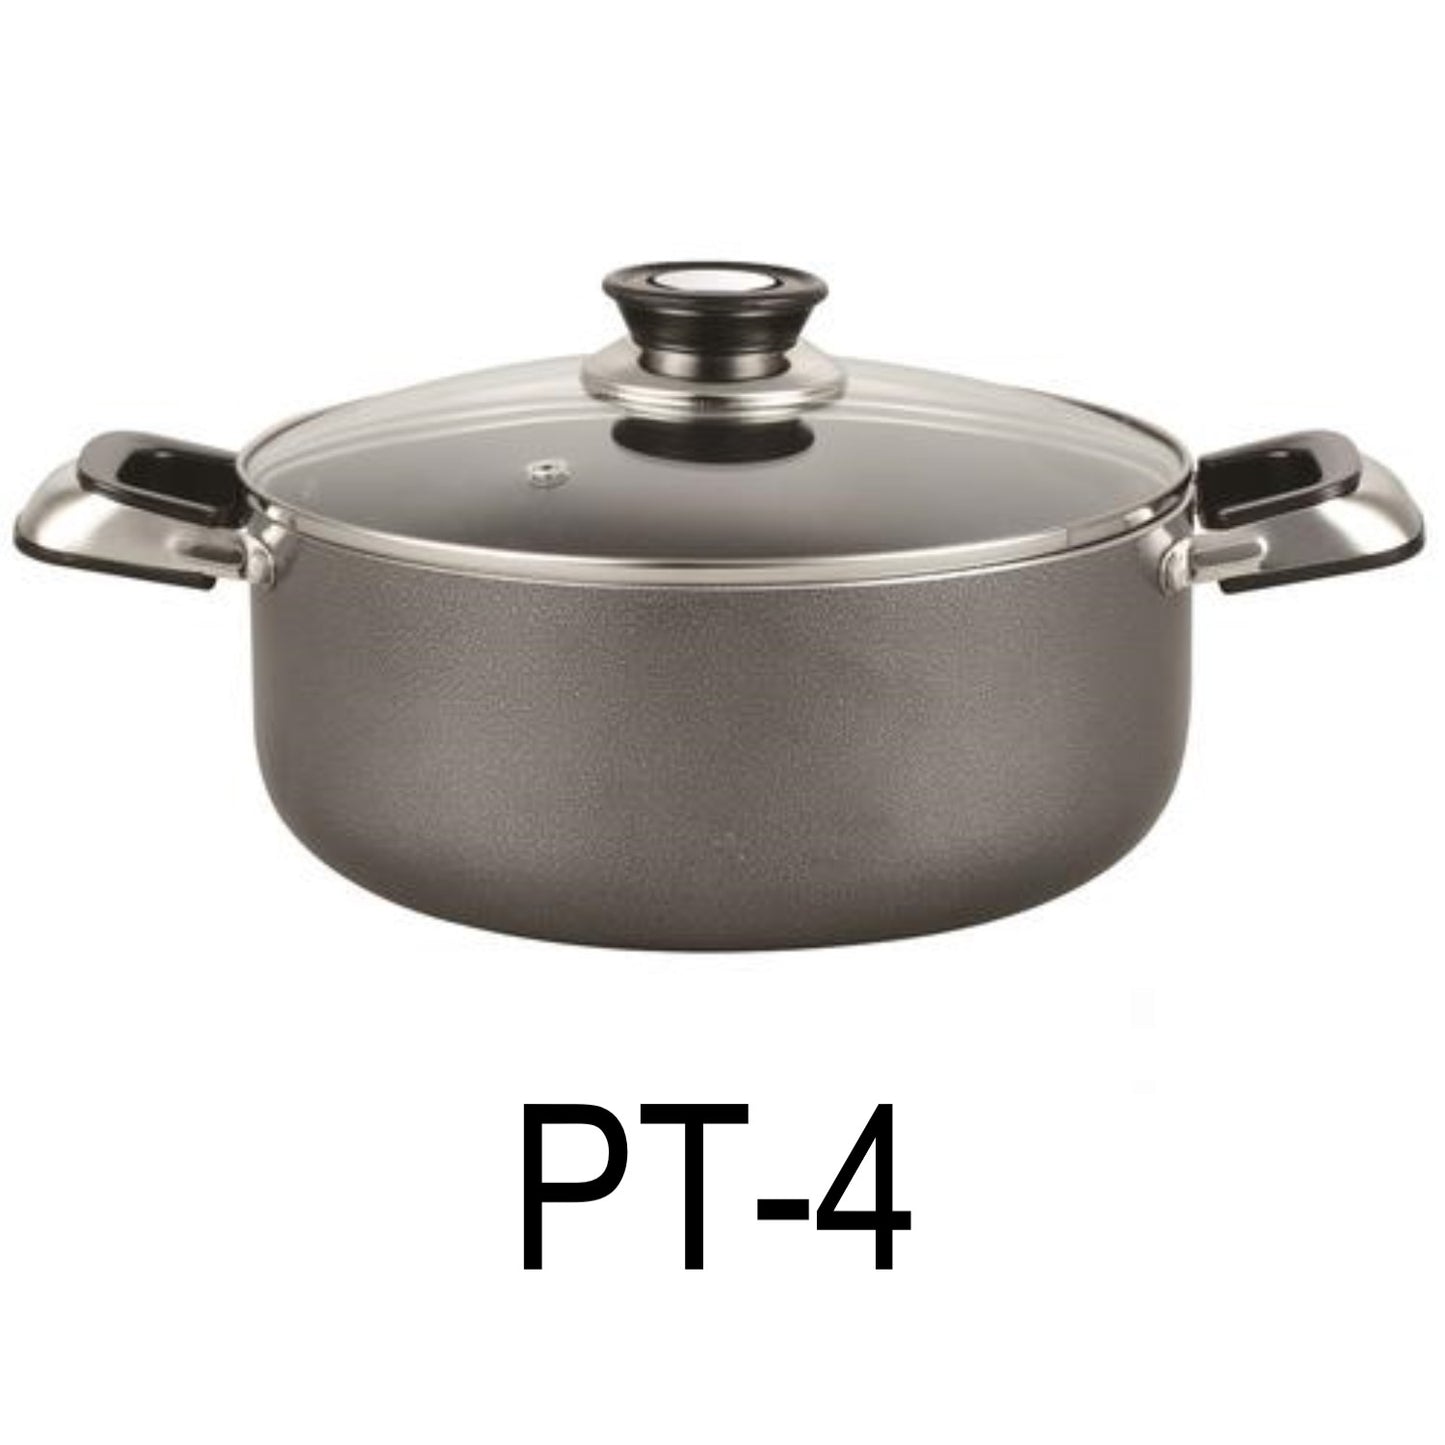 4 QT Non-stick Stockpot with Glass Lid